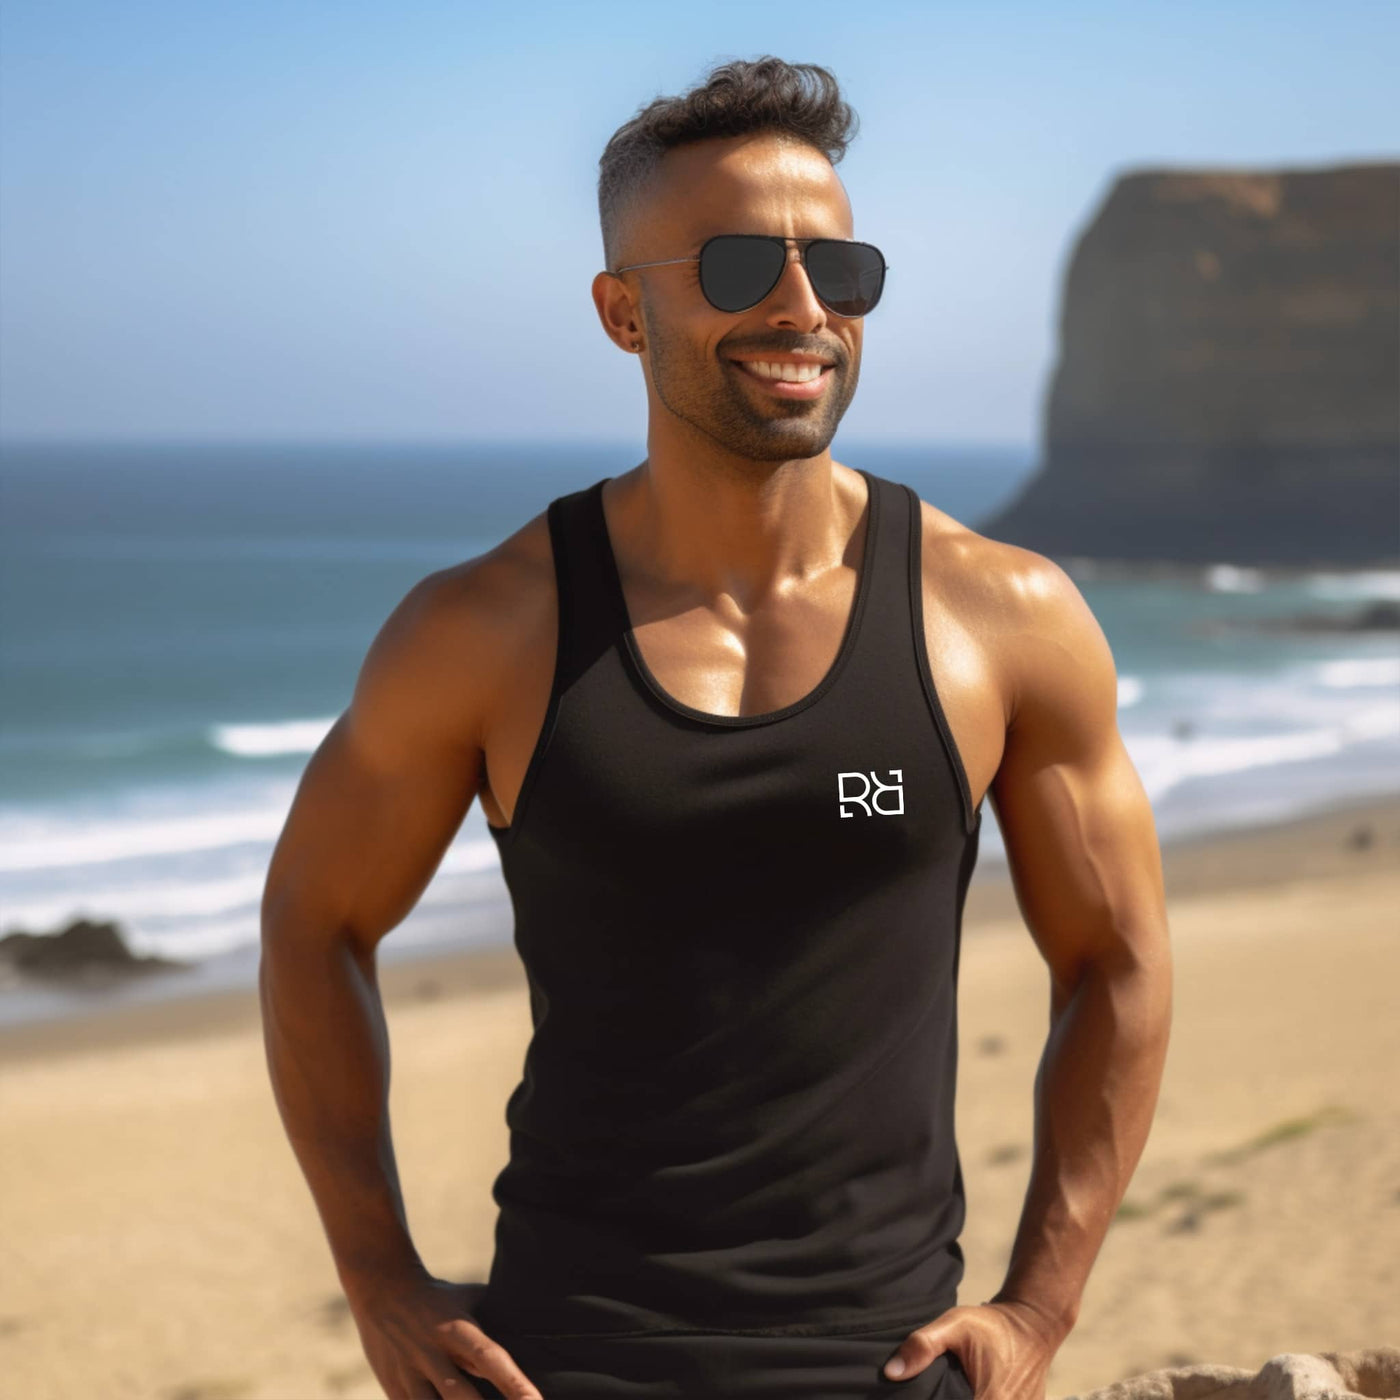 The Harder You Work the Luckier You Get | Premium Men's Tank